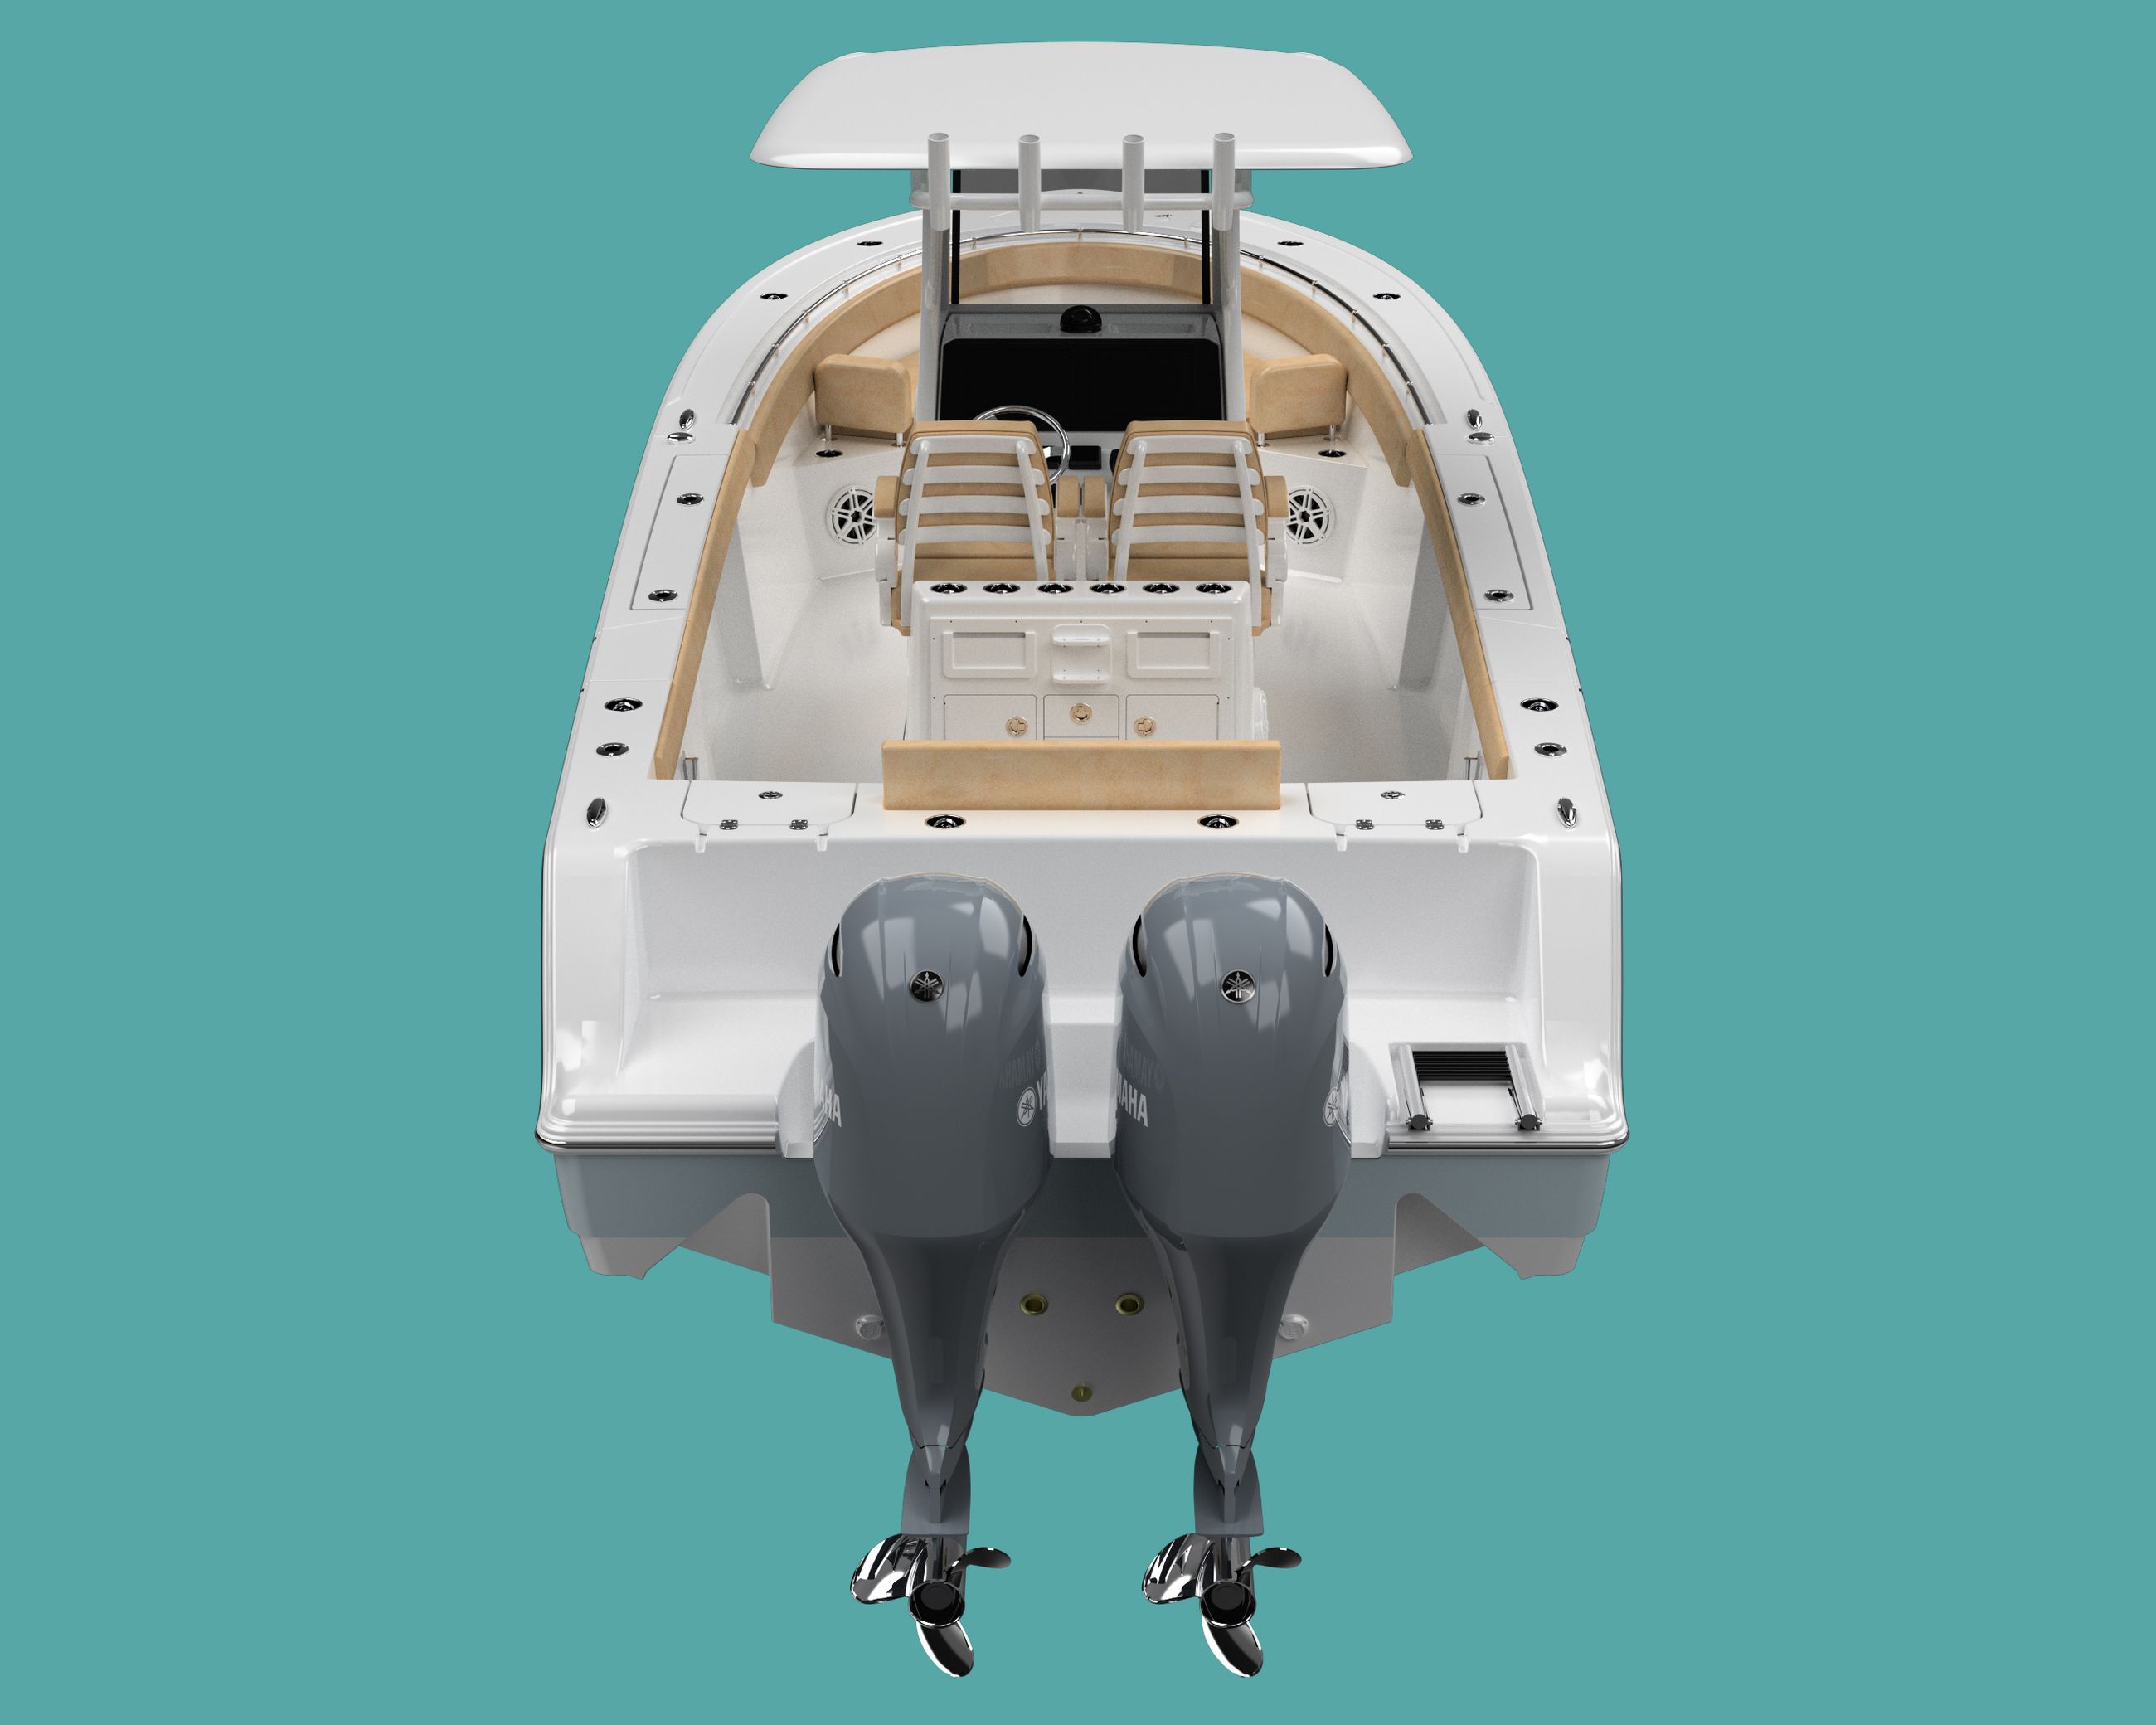 Detail image of the Open 262 Center Console